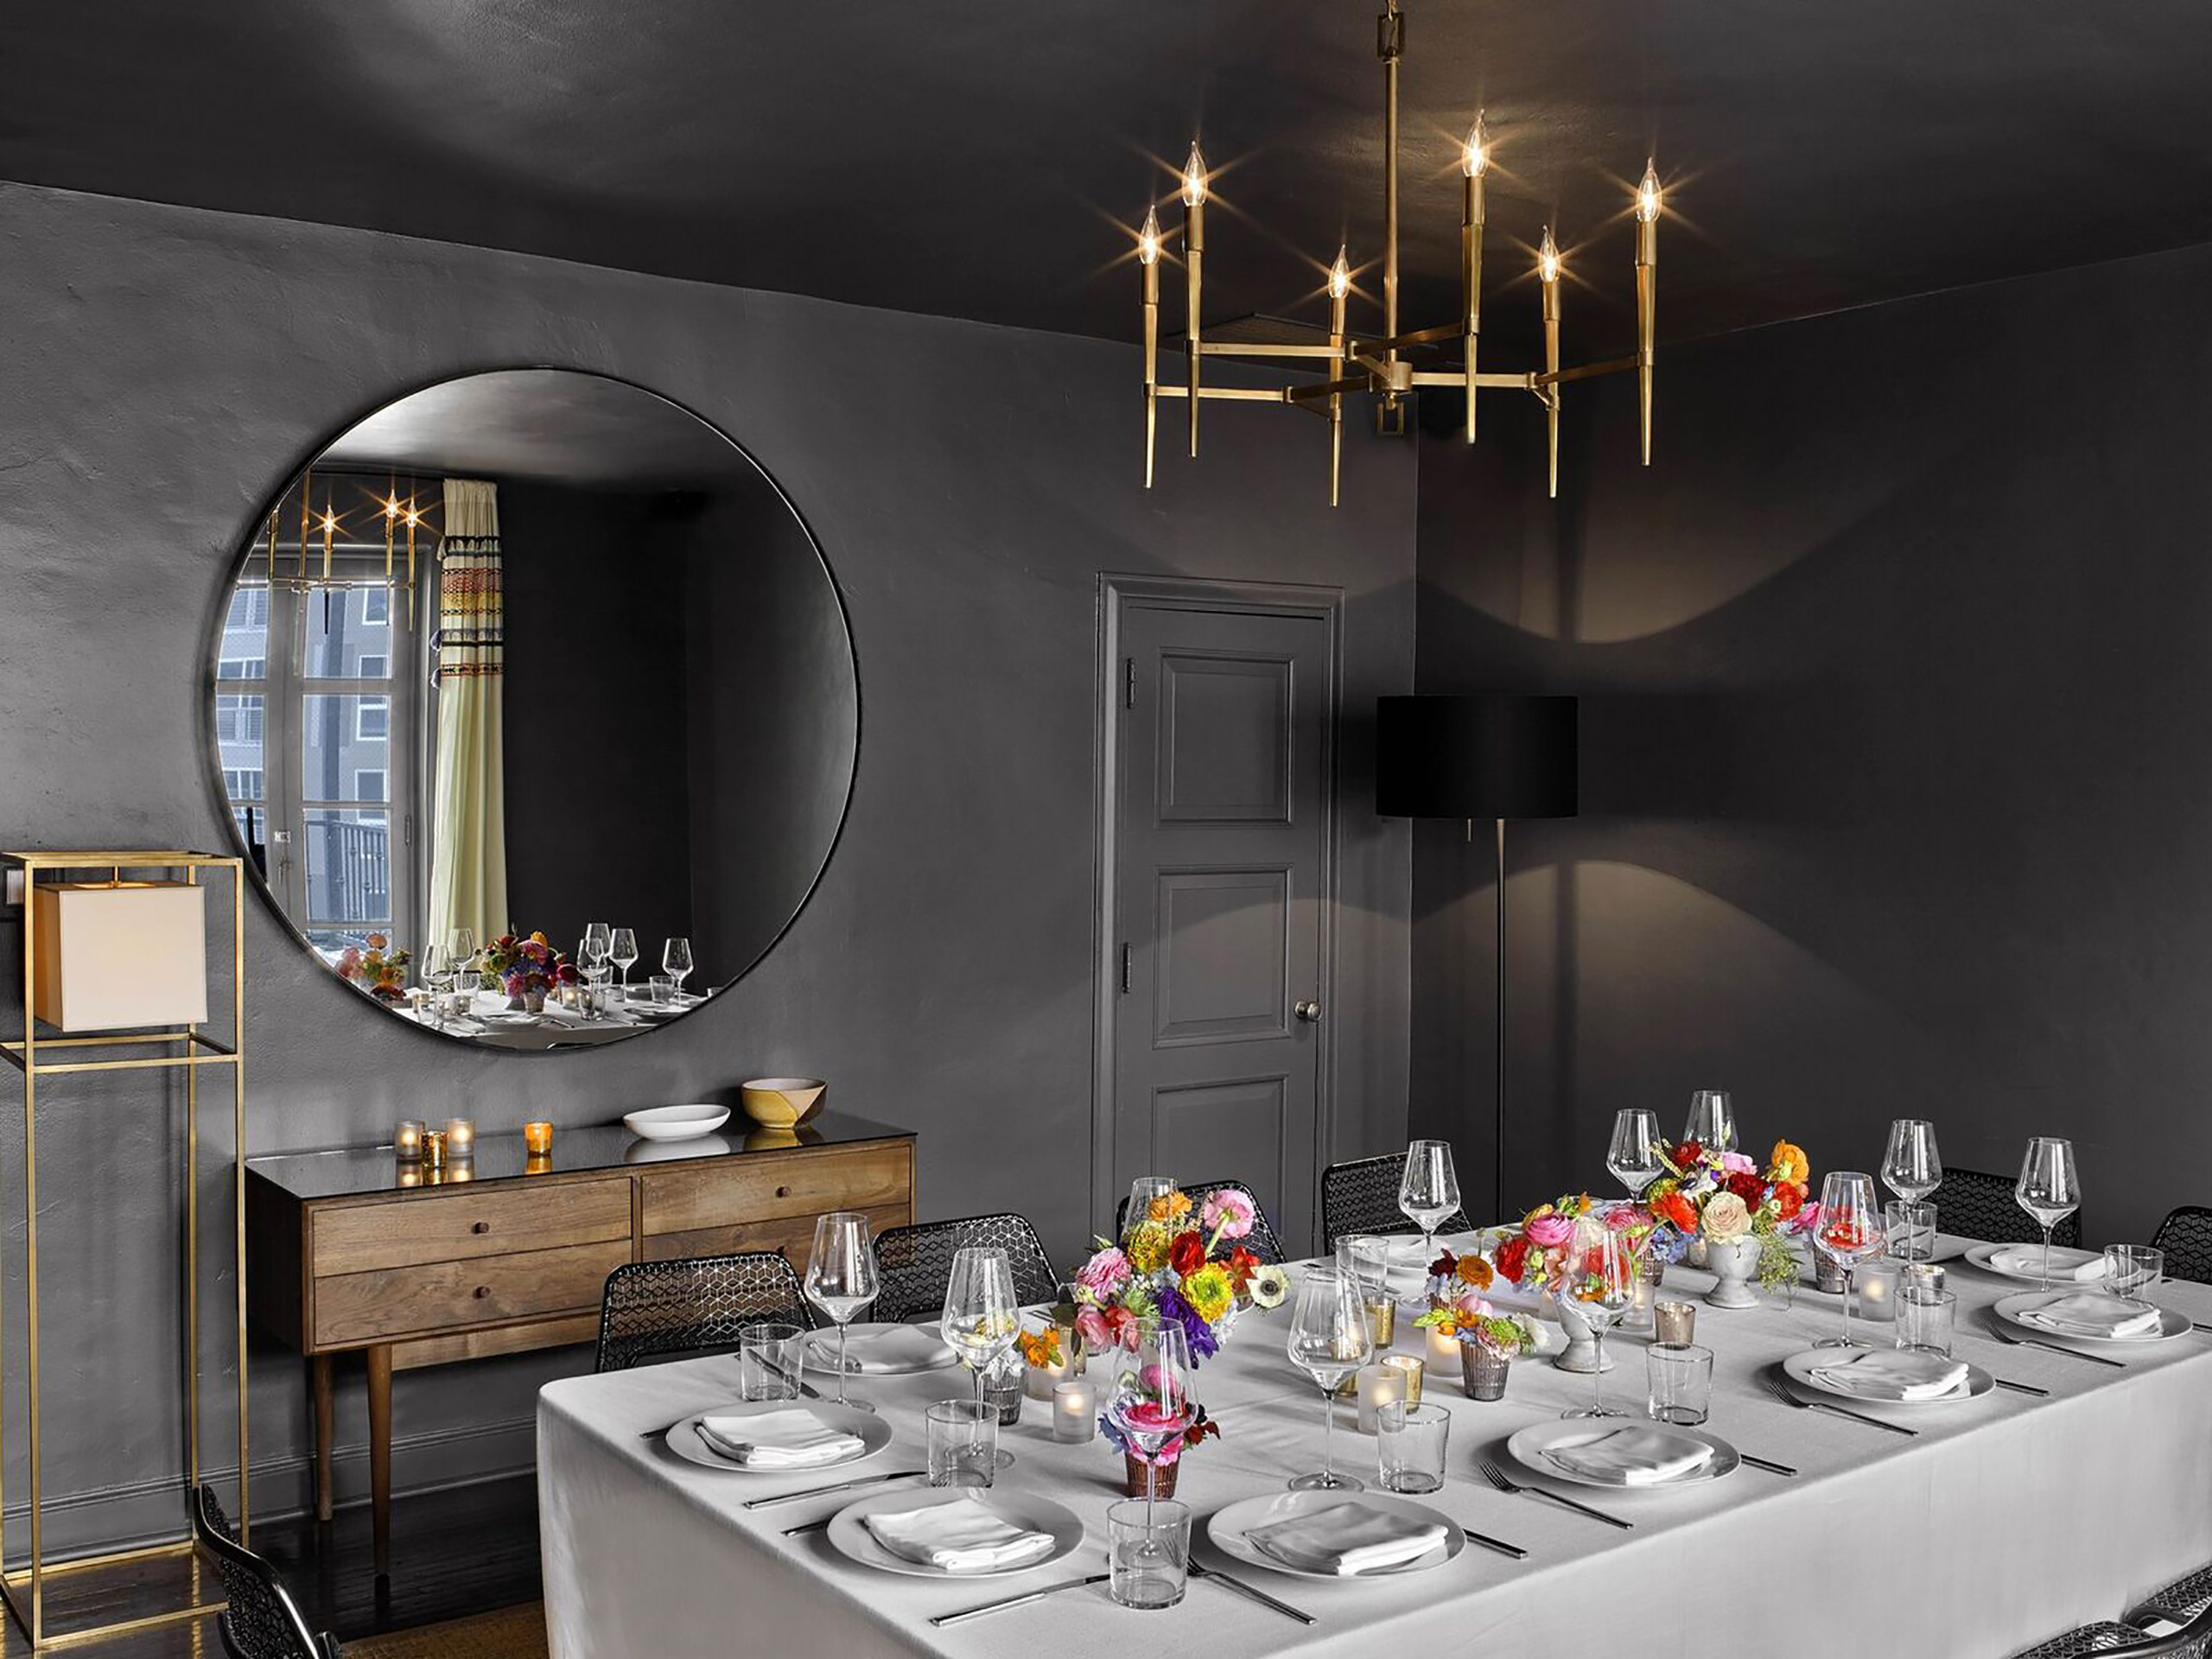 black room with gold light fixture, large round mirror, and large table set with flowers